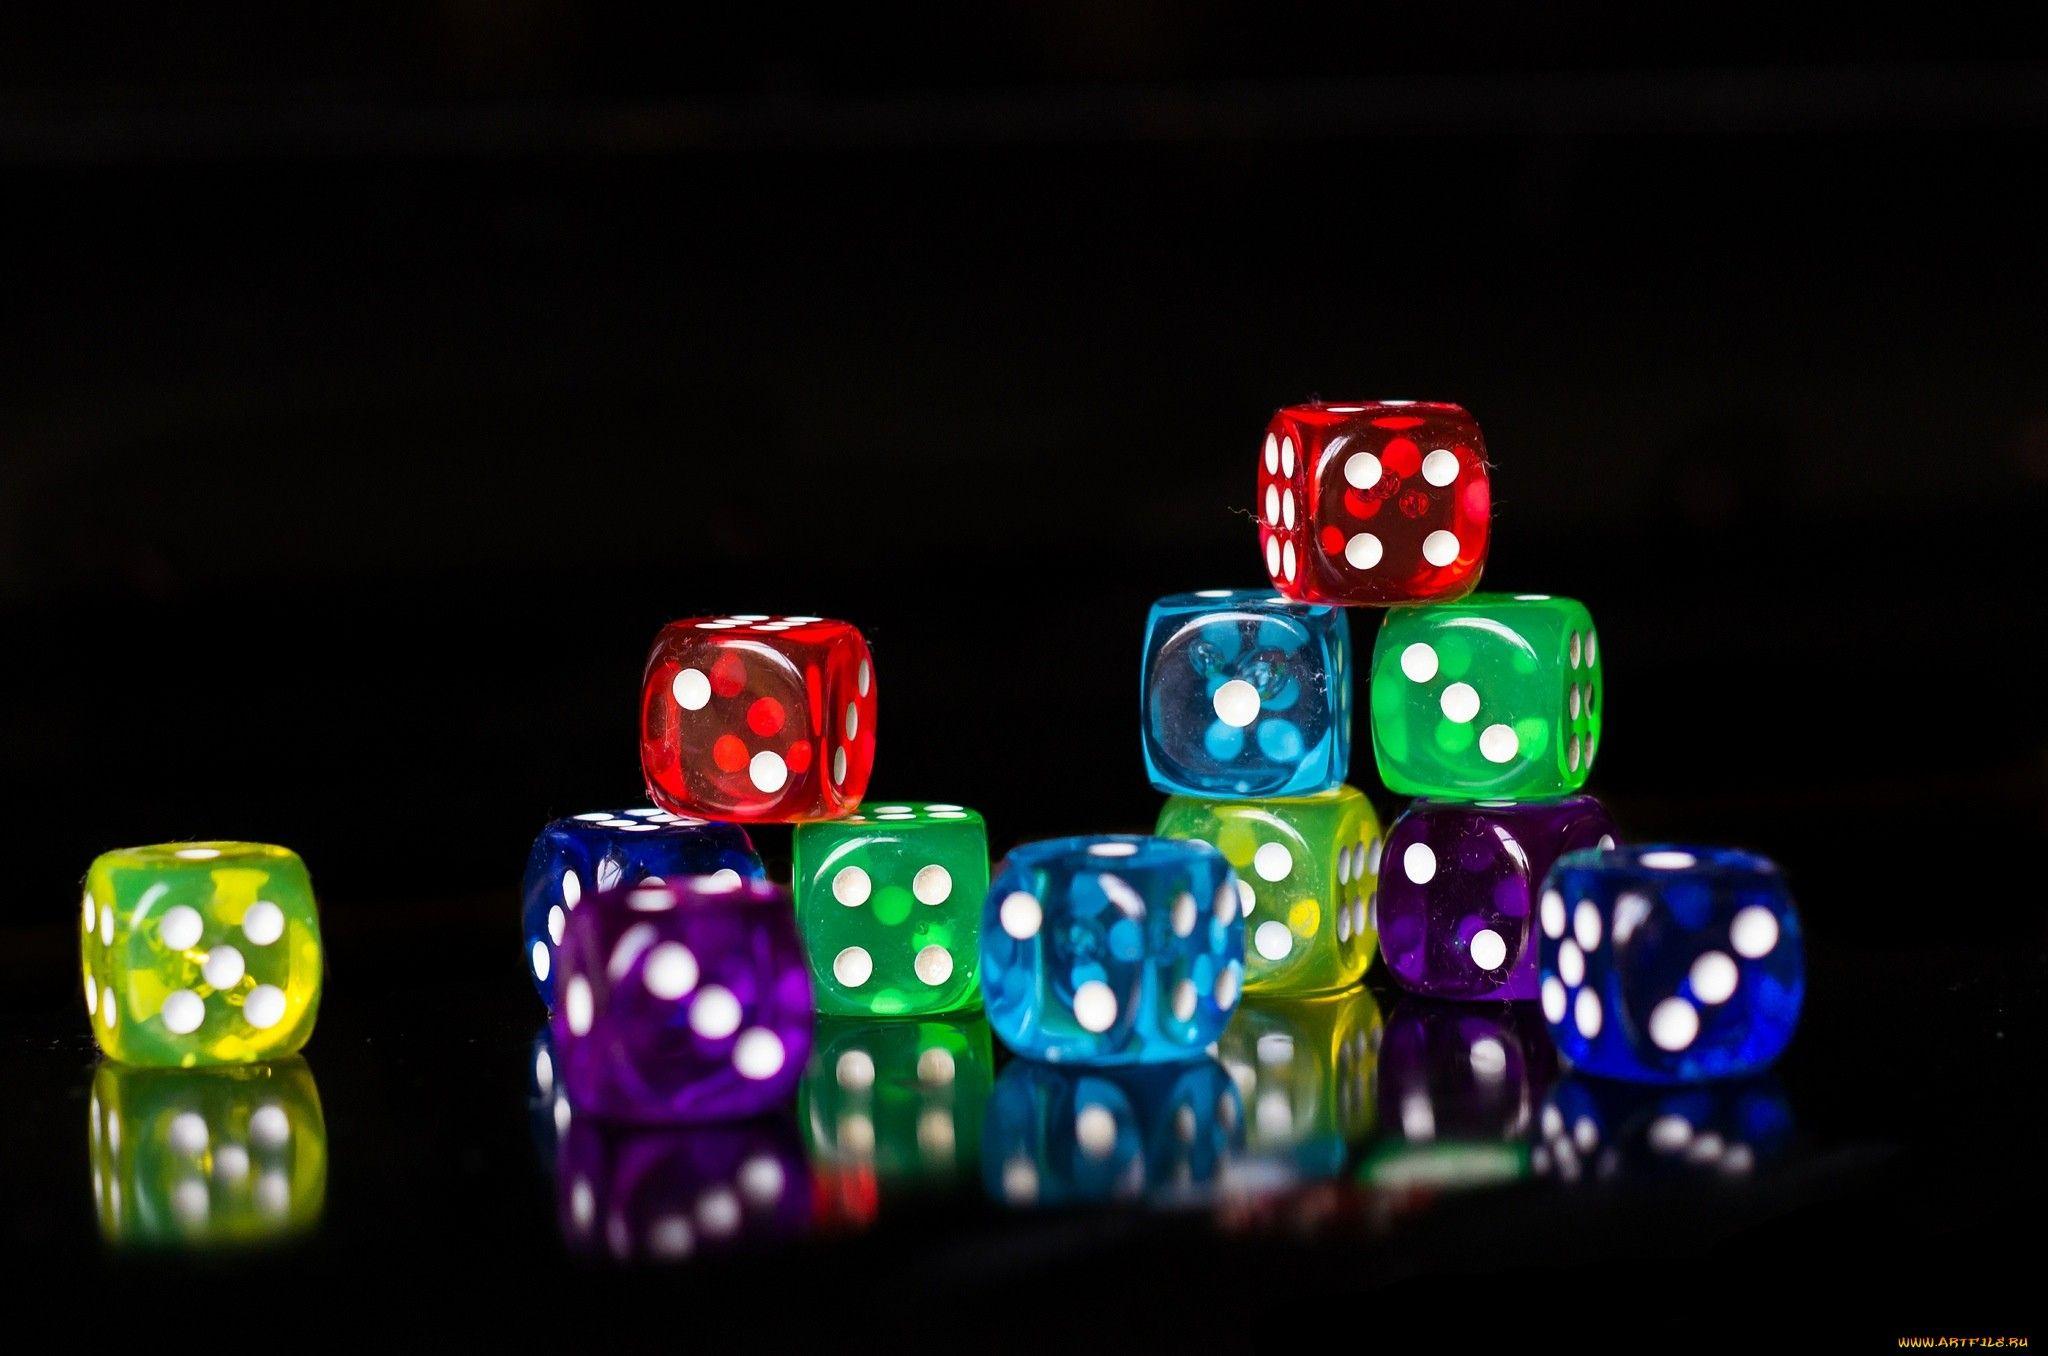 WX 47 3D Dice Wallpaper, 3D Dice Full HD Picture and Wallpaper